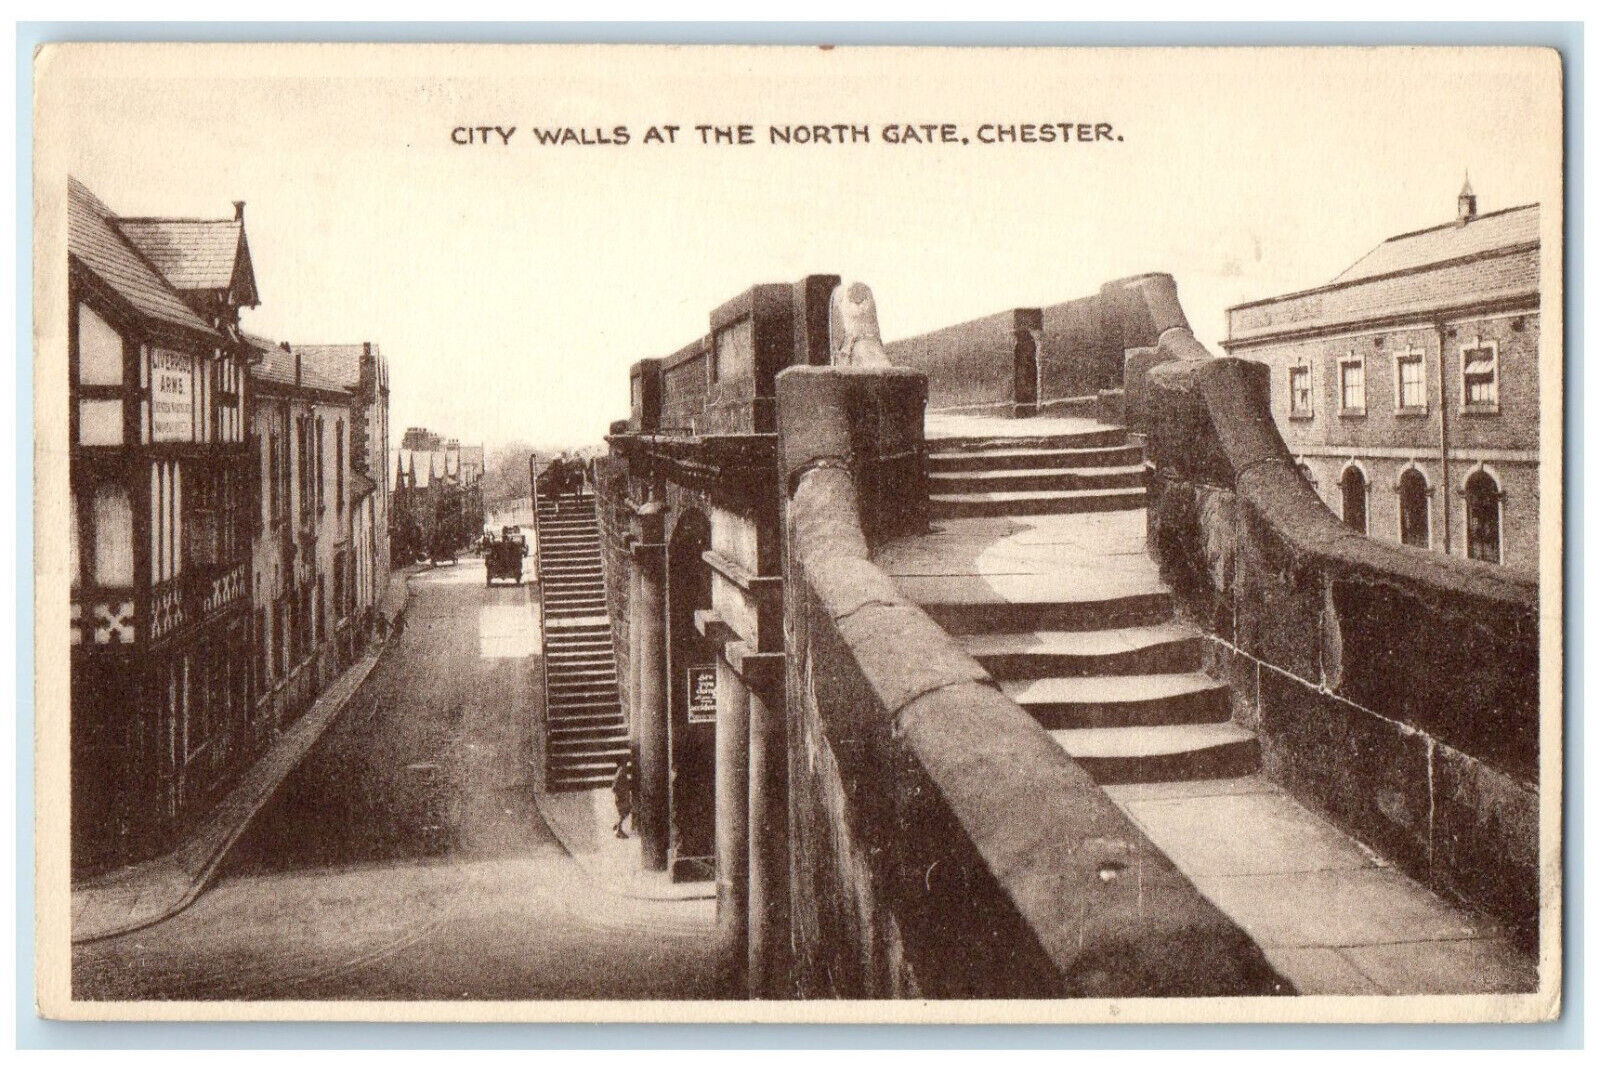 c1930's City Walls at the North Gate Chester England Vintage Postcard